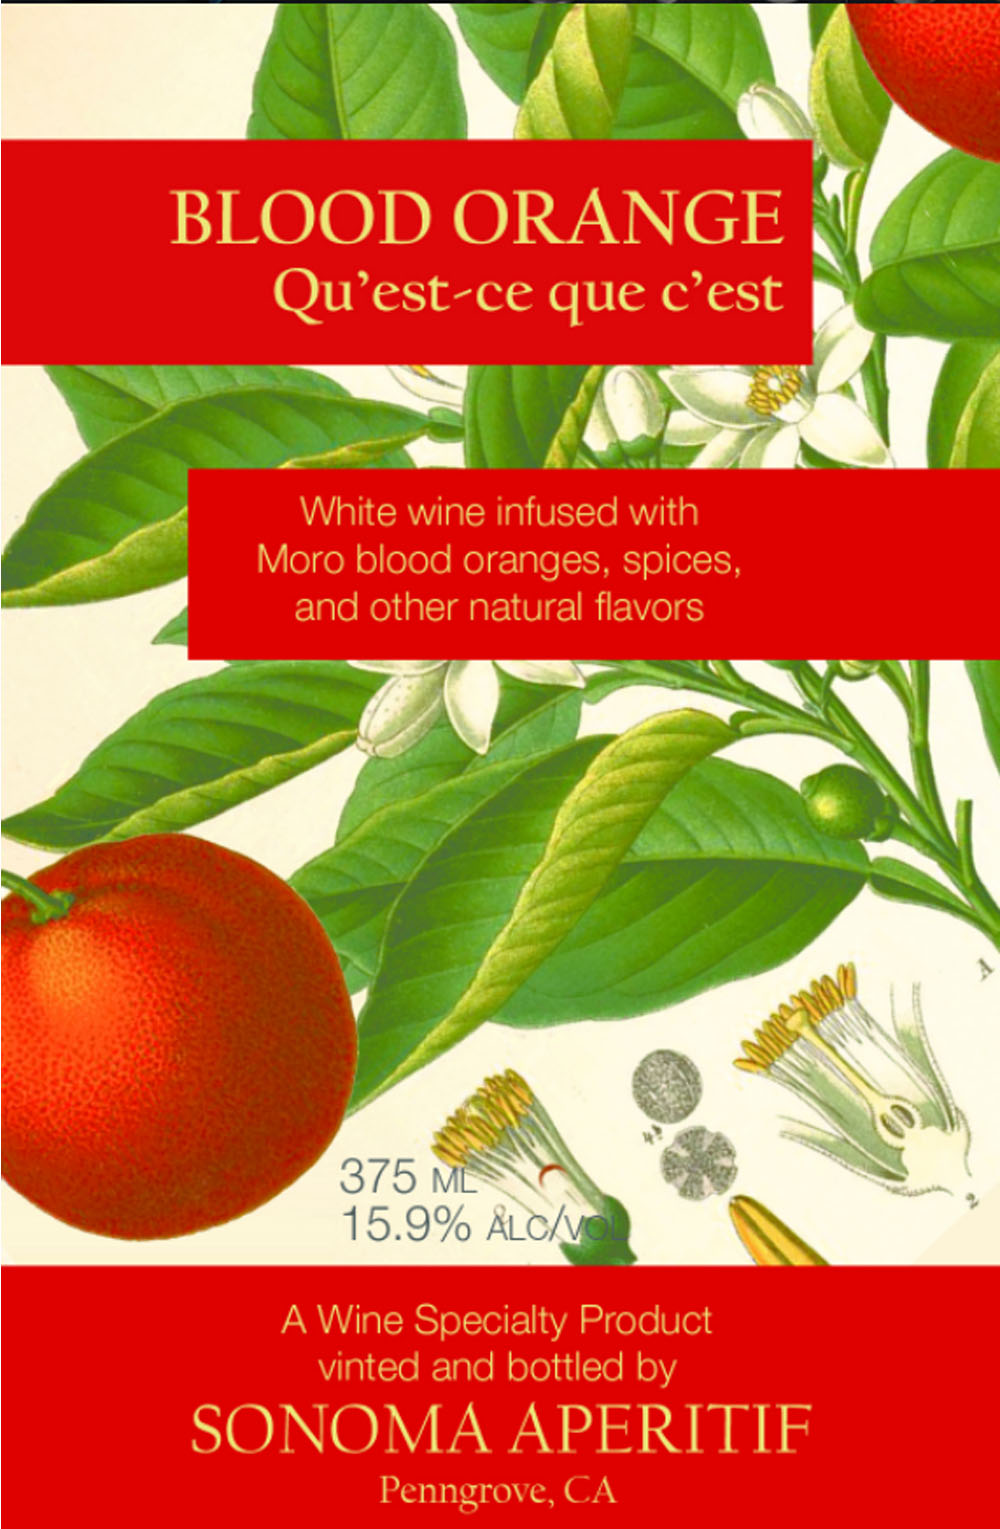 Blood orange label. Strict and sometimes puzzling regulations prohibited Hagar-Rush from putting "aperitif" on her labels so instead, she puckishly calls her essences "Qu'est-ce que c'est" (what is it?)